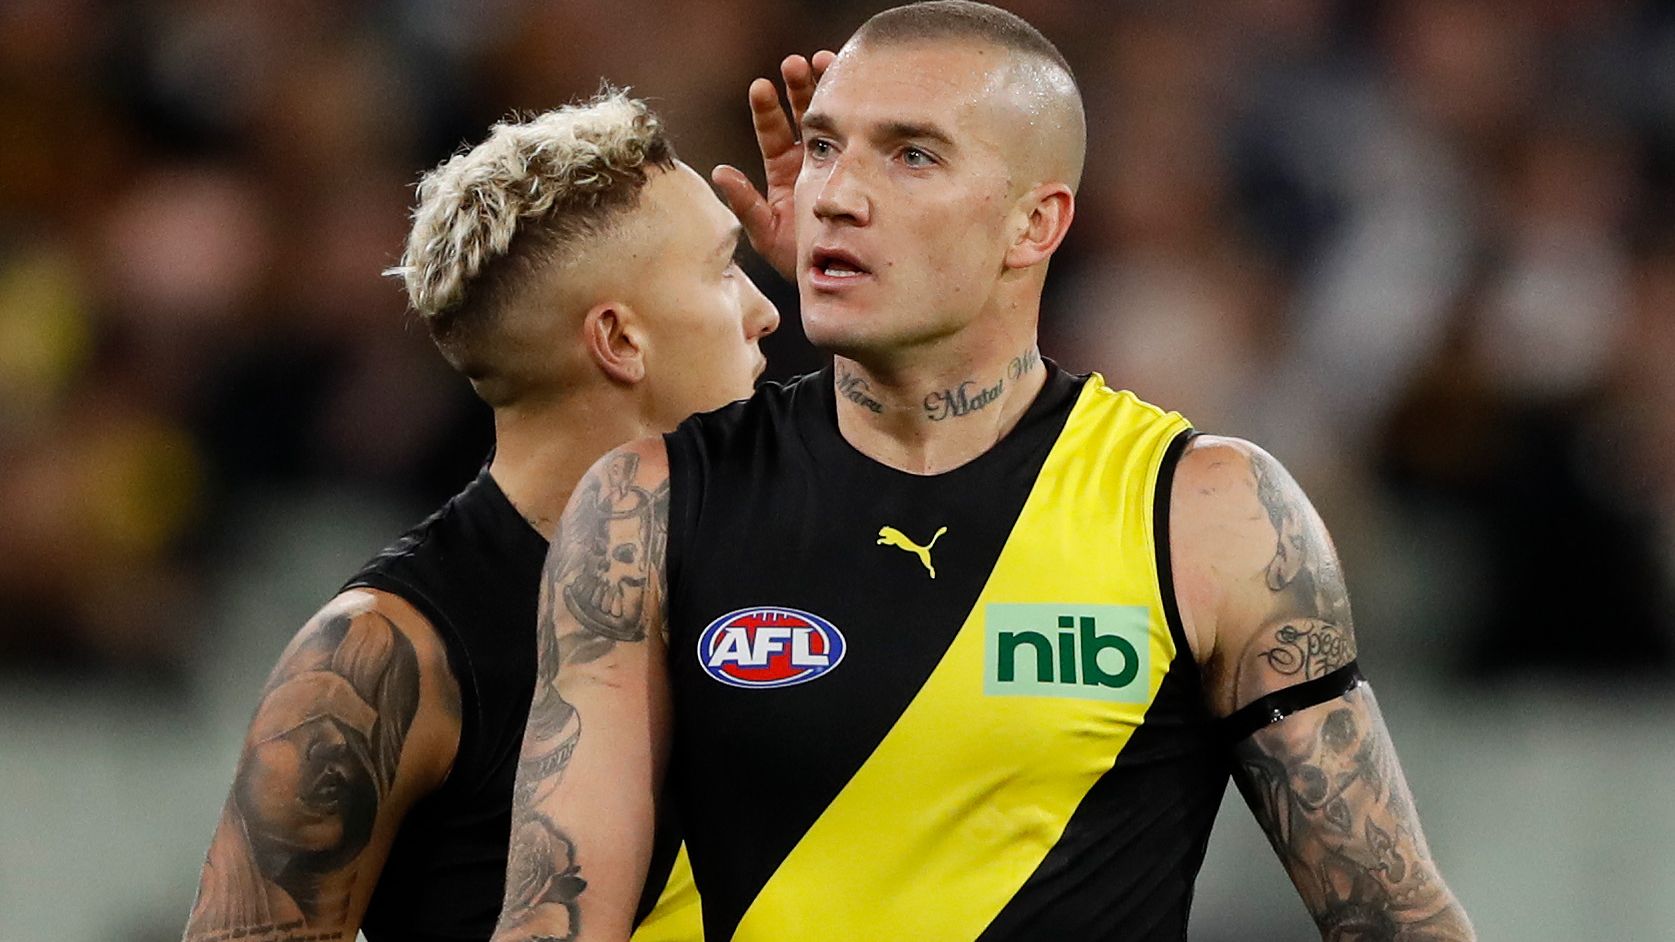 Afl Investigation Into Dustin Martin's Topless Woman '